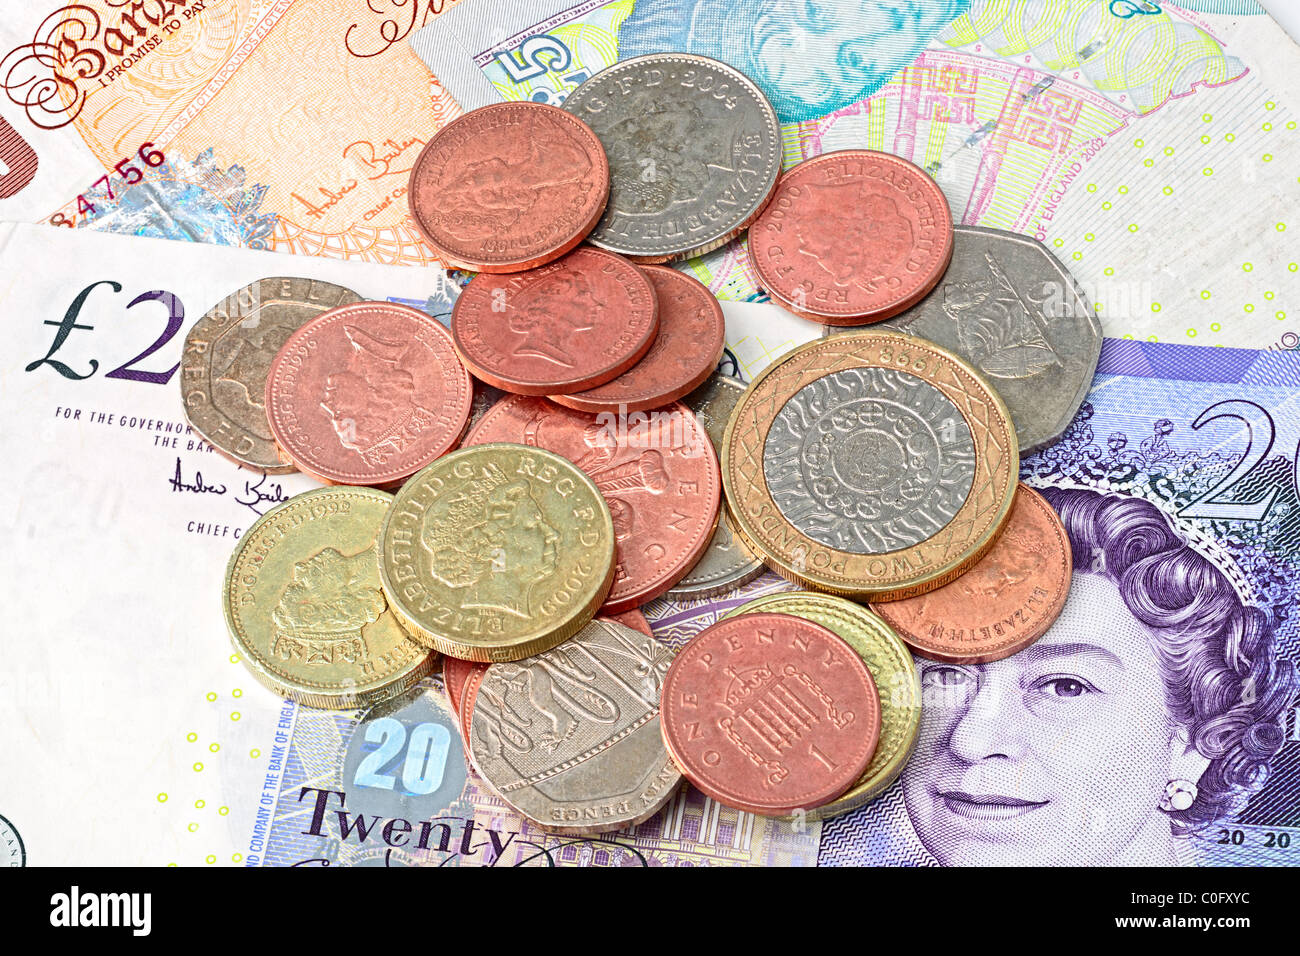 Selection of contemporary British coins, on British banknote background Stock Photo